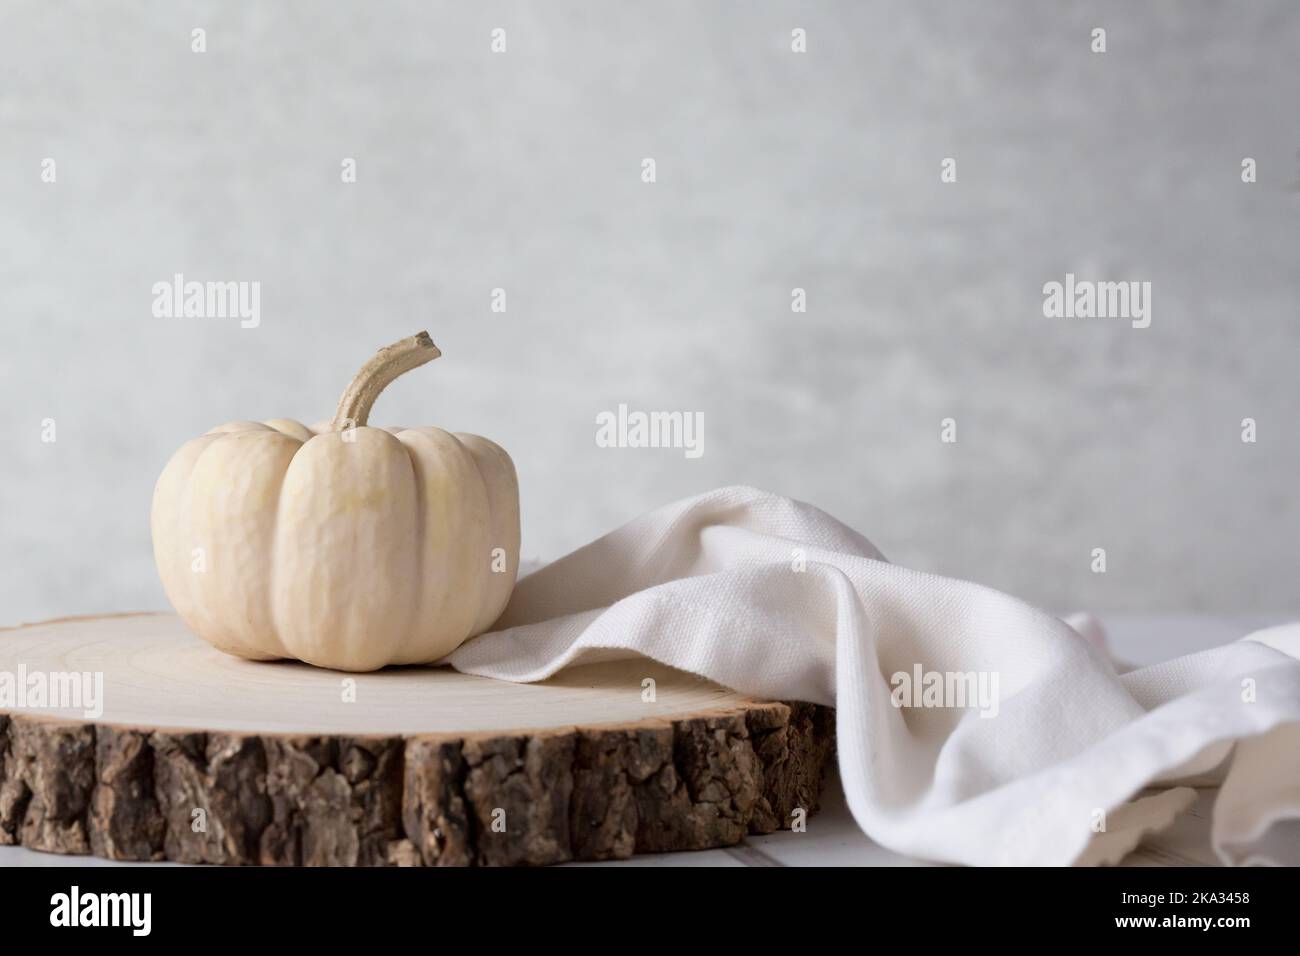 Baby Boo Ghost pumpkin on wooden block with cream linen napkin against a light background. Crisp, light and airy still life . Stock Photo